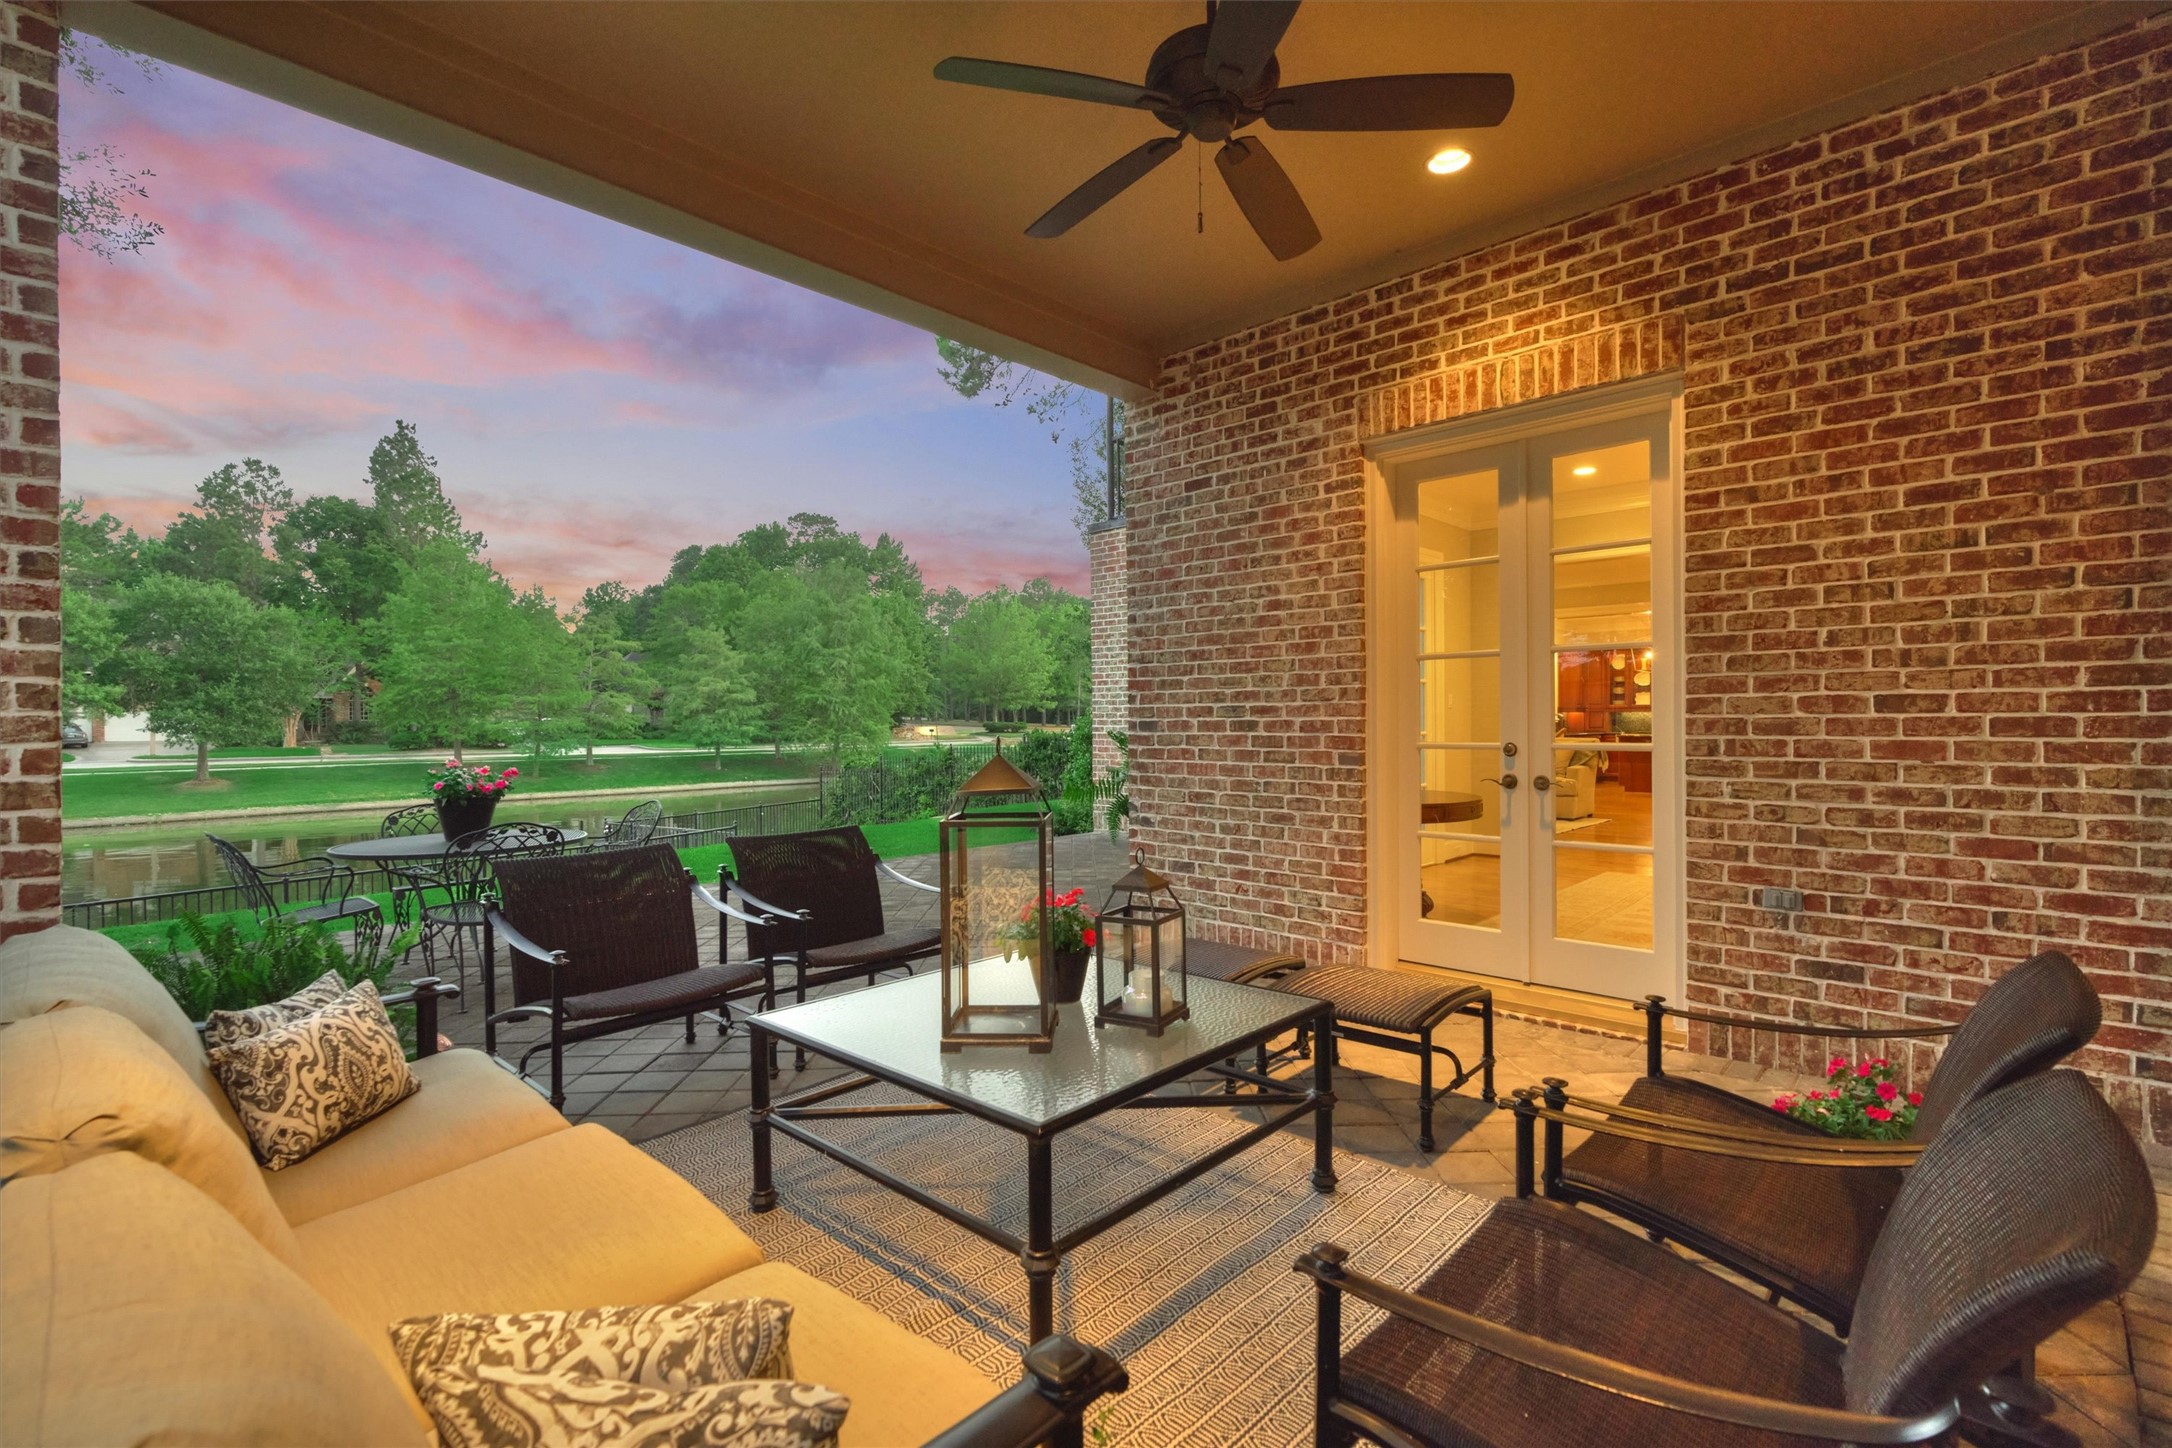 Relax and enjoy the view as you gather family & friends on the covered back patio that overlooks the lake.